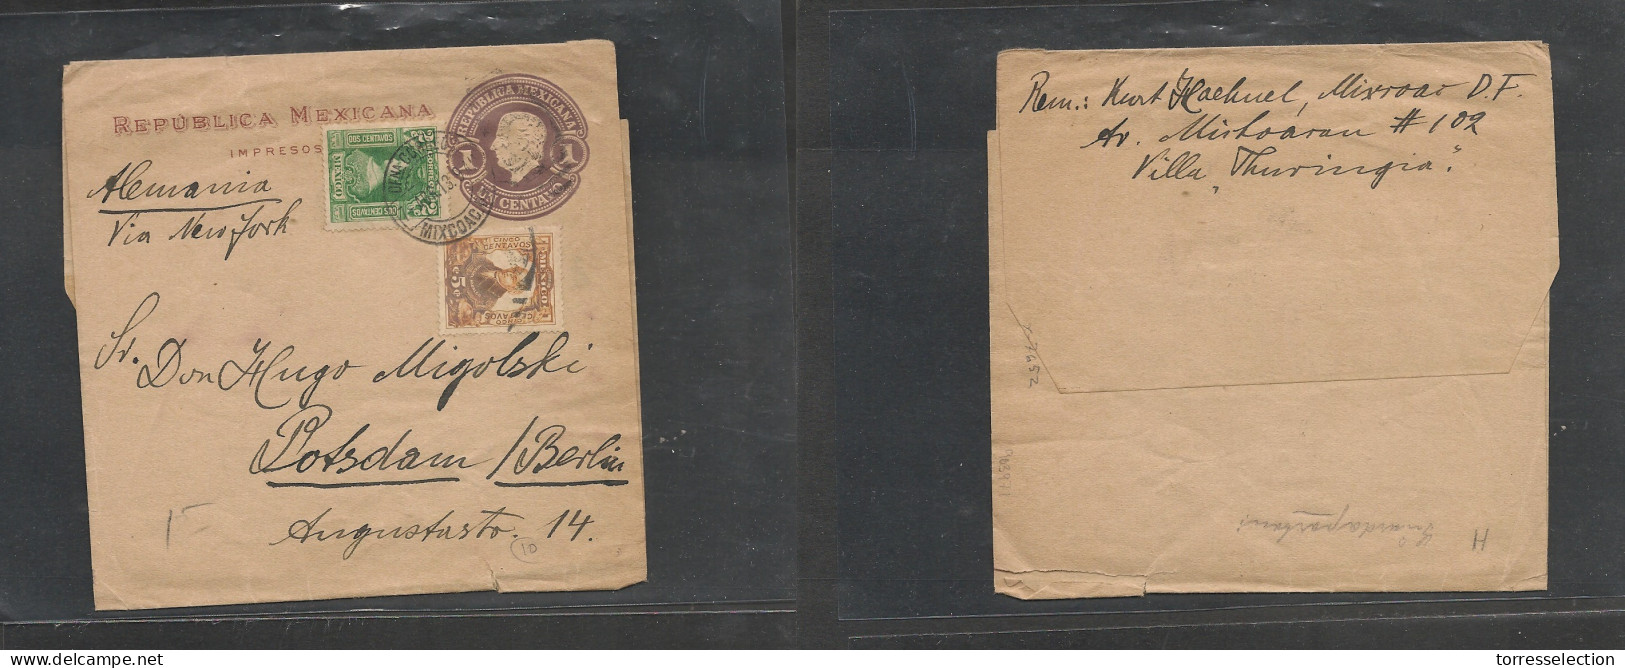 MEXICO. Mexico Cover - 1913 Stat Wcomplete Wrapper Mixcoac To Berlin Germany 1c Stat+ Two Adtls, Vf XSALE. - Mexique